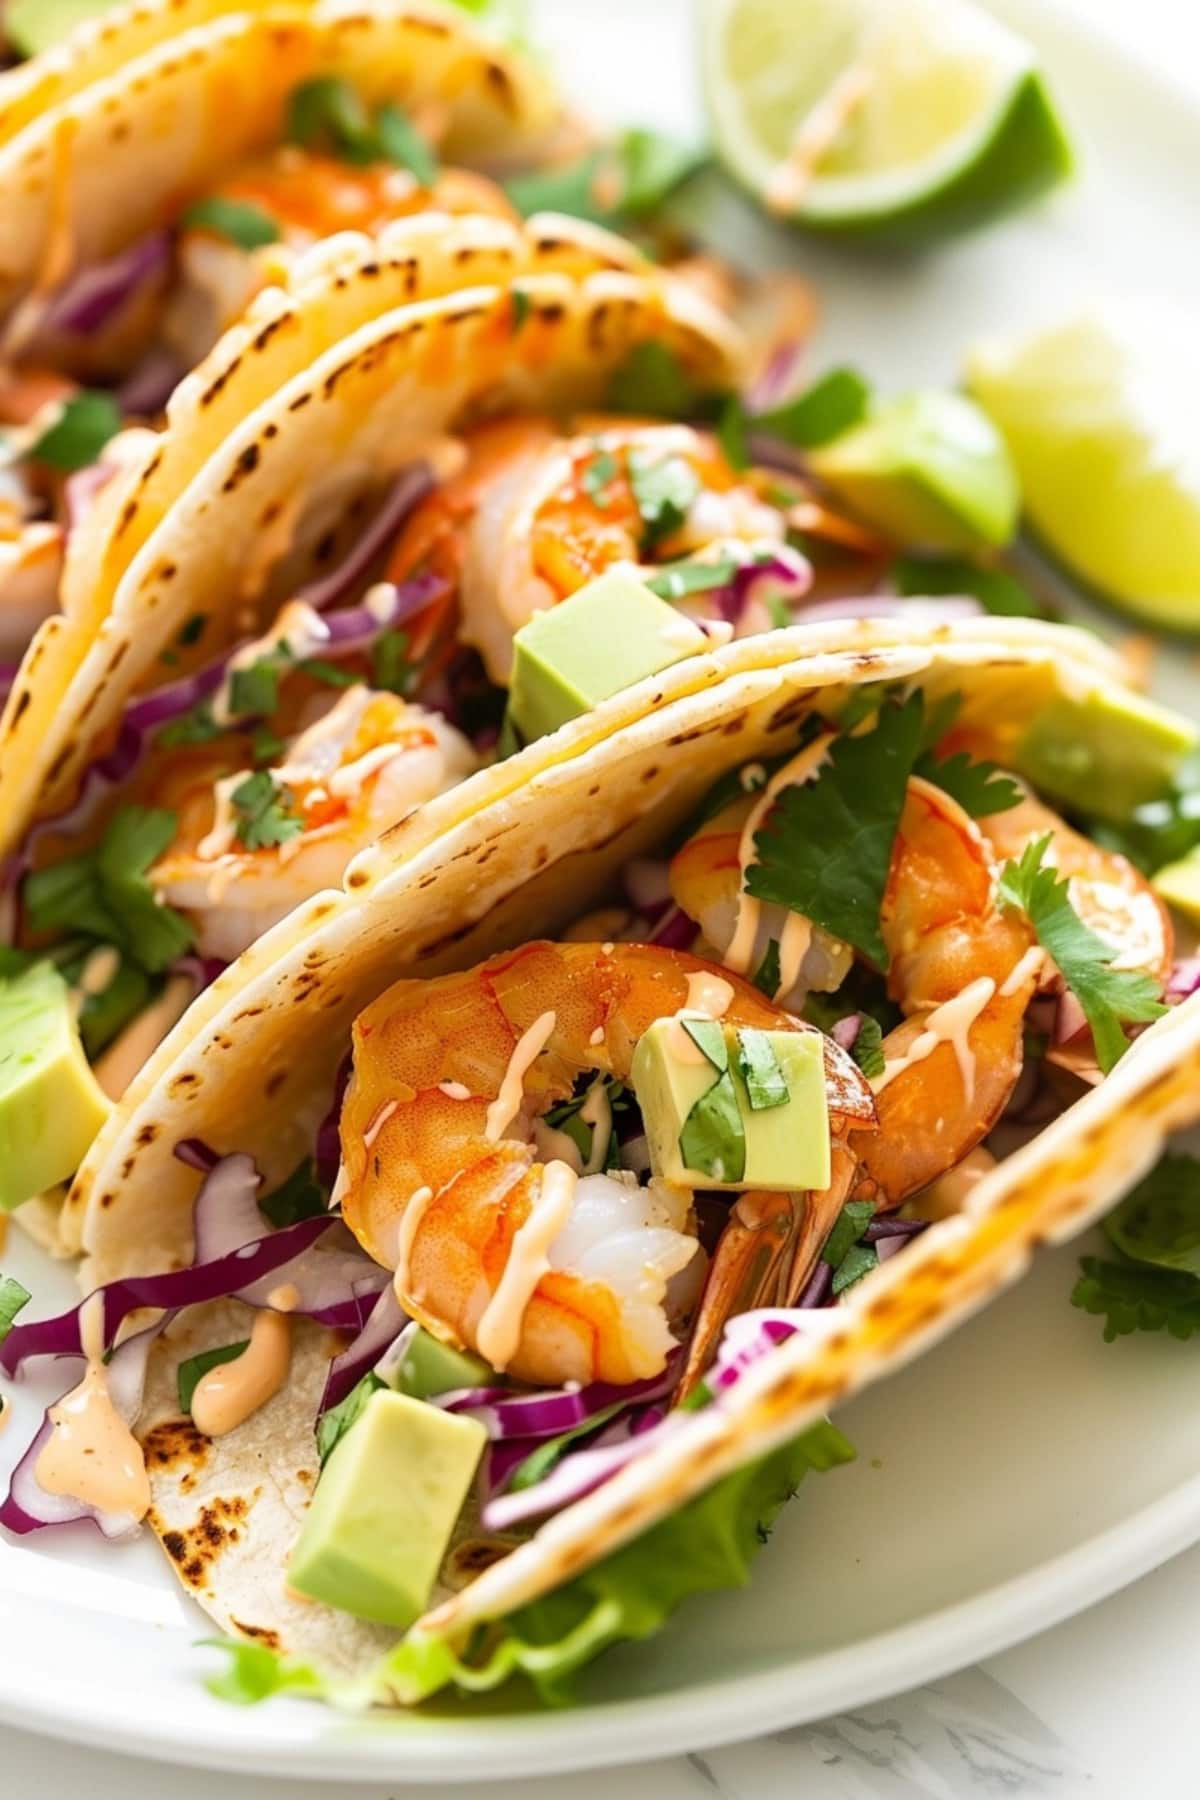 Taco shrimp on a white plate with shrimp, avocado, shredded red cabbage, onion, salsa drizzled with dressing.